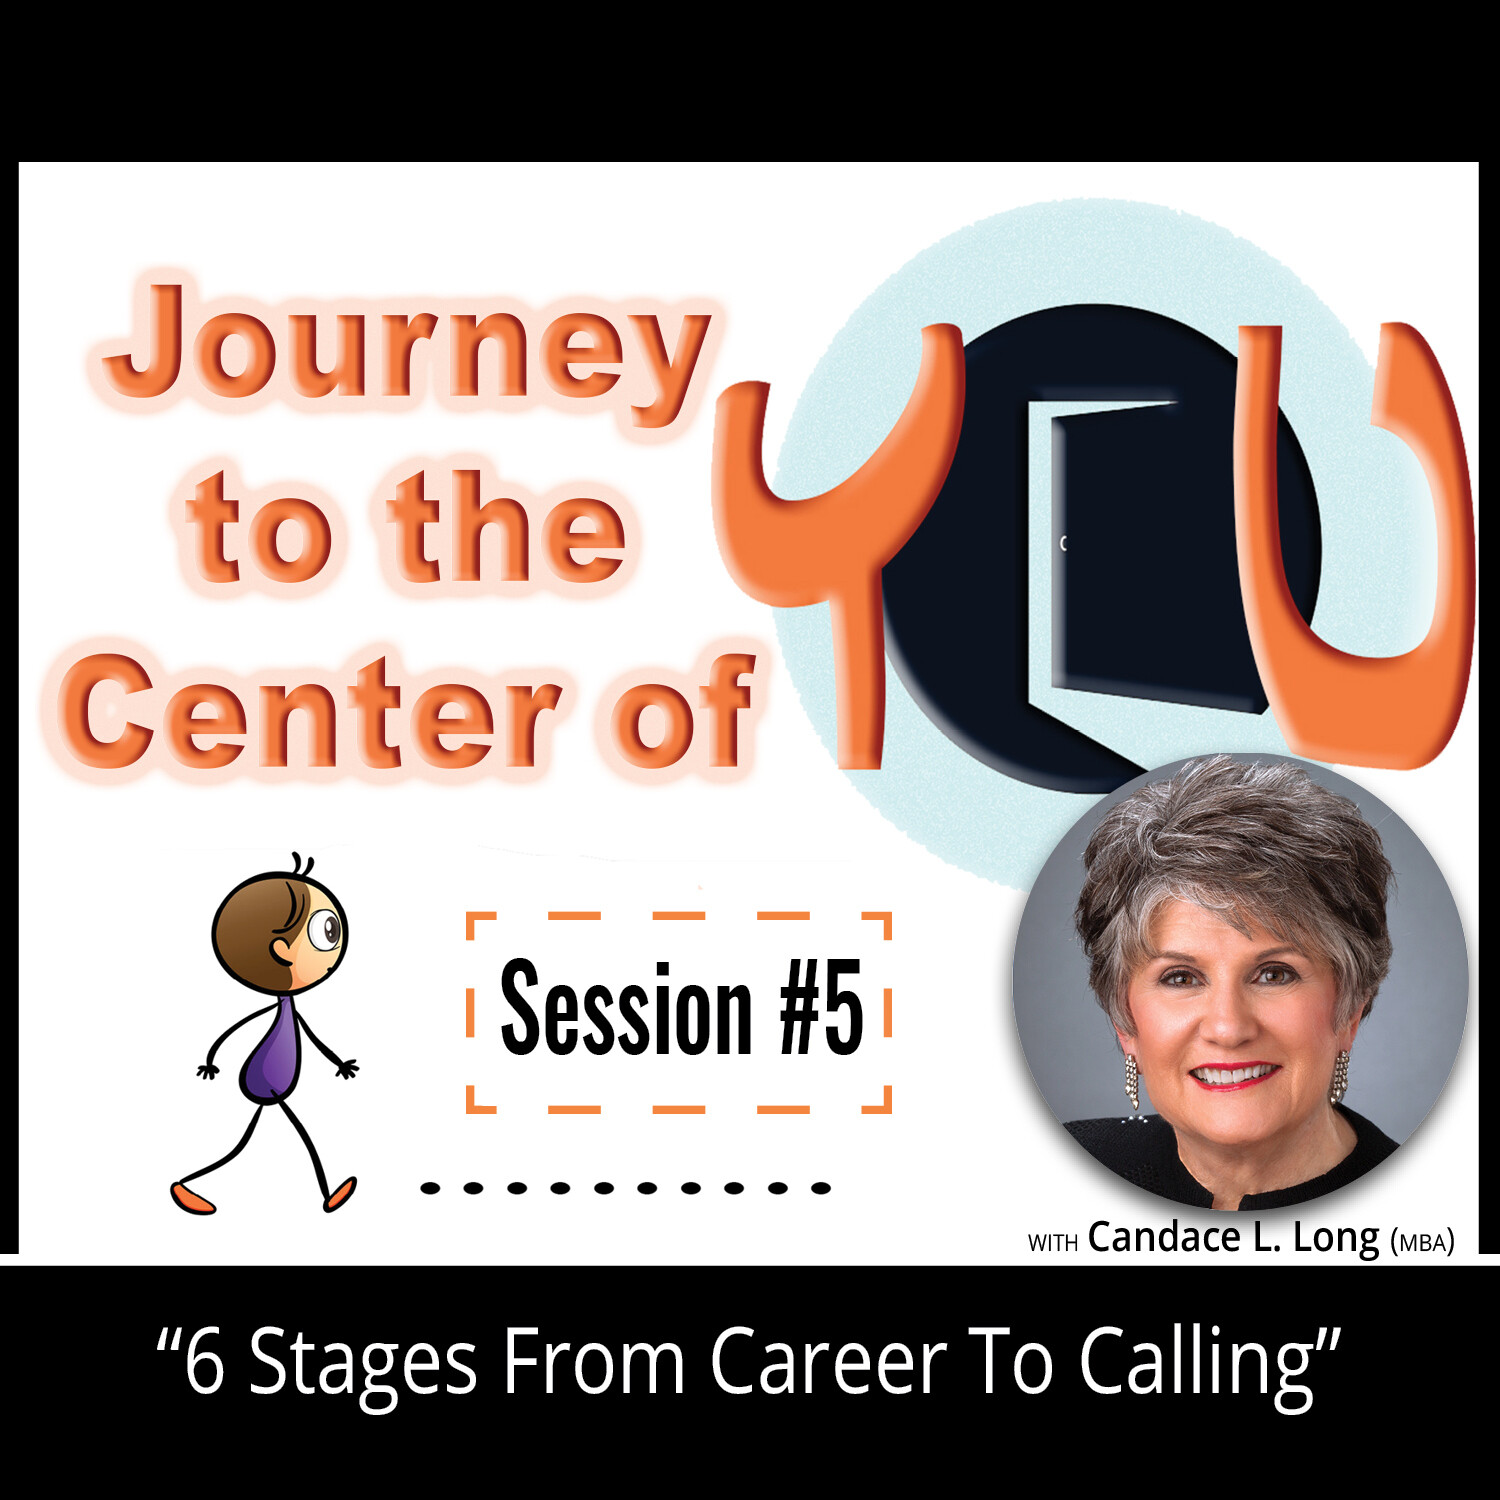 Session #5: THE 6 STAGES FROM A CAREER TO A CALLING